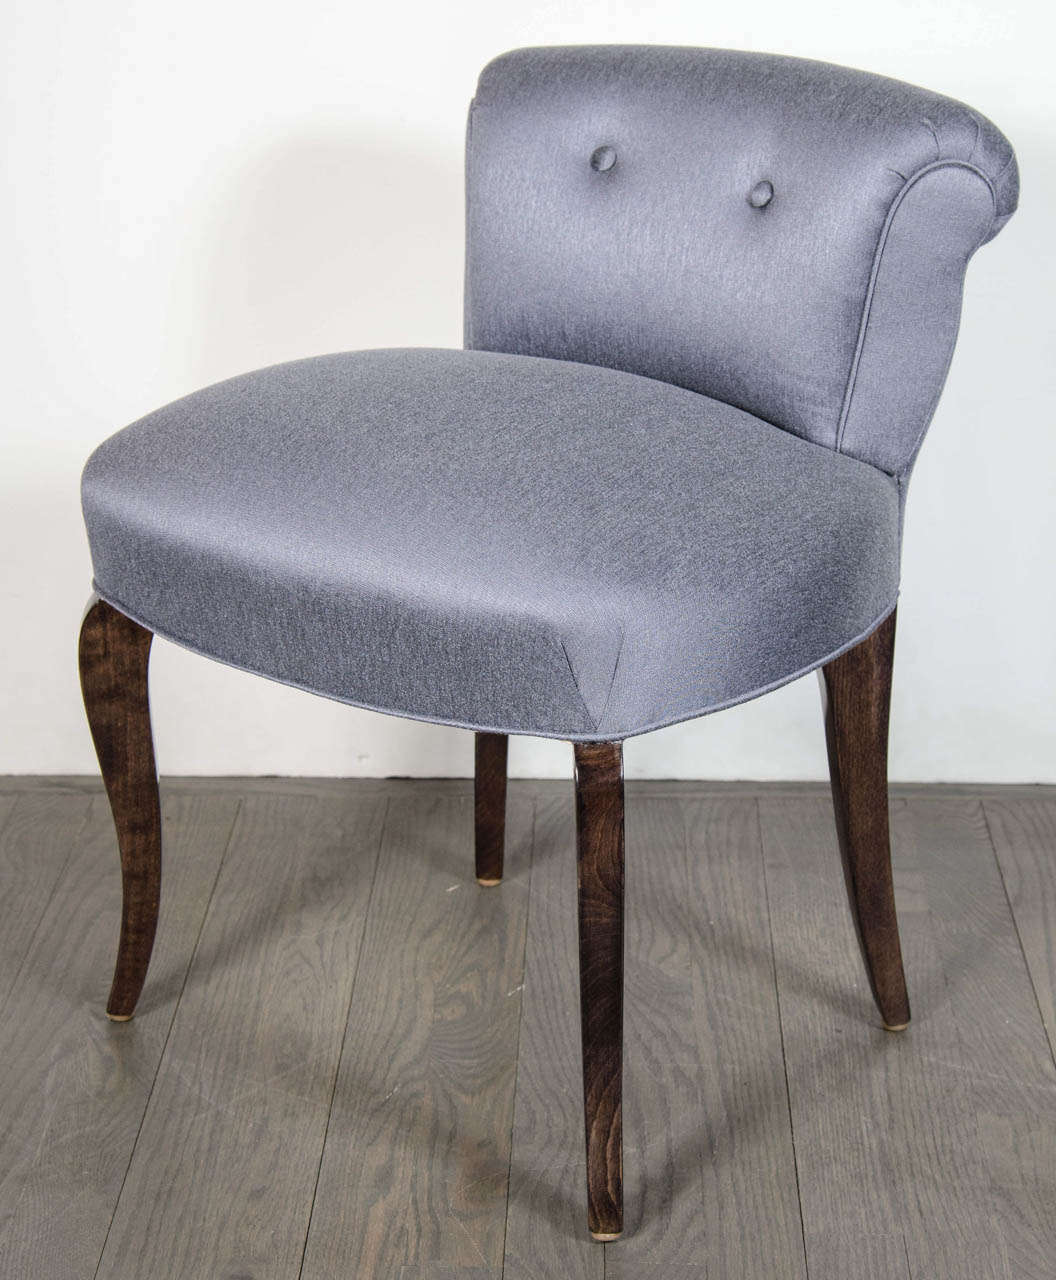 1940's Hollywood vanity chair upholstered in a chic platinum / blue sharkskin.  It has a scroll back design with two button back detailing and ebonized walnut cabriole legs that mimic the silhouette of the scroll back design.  It has been newly